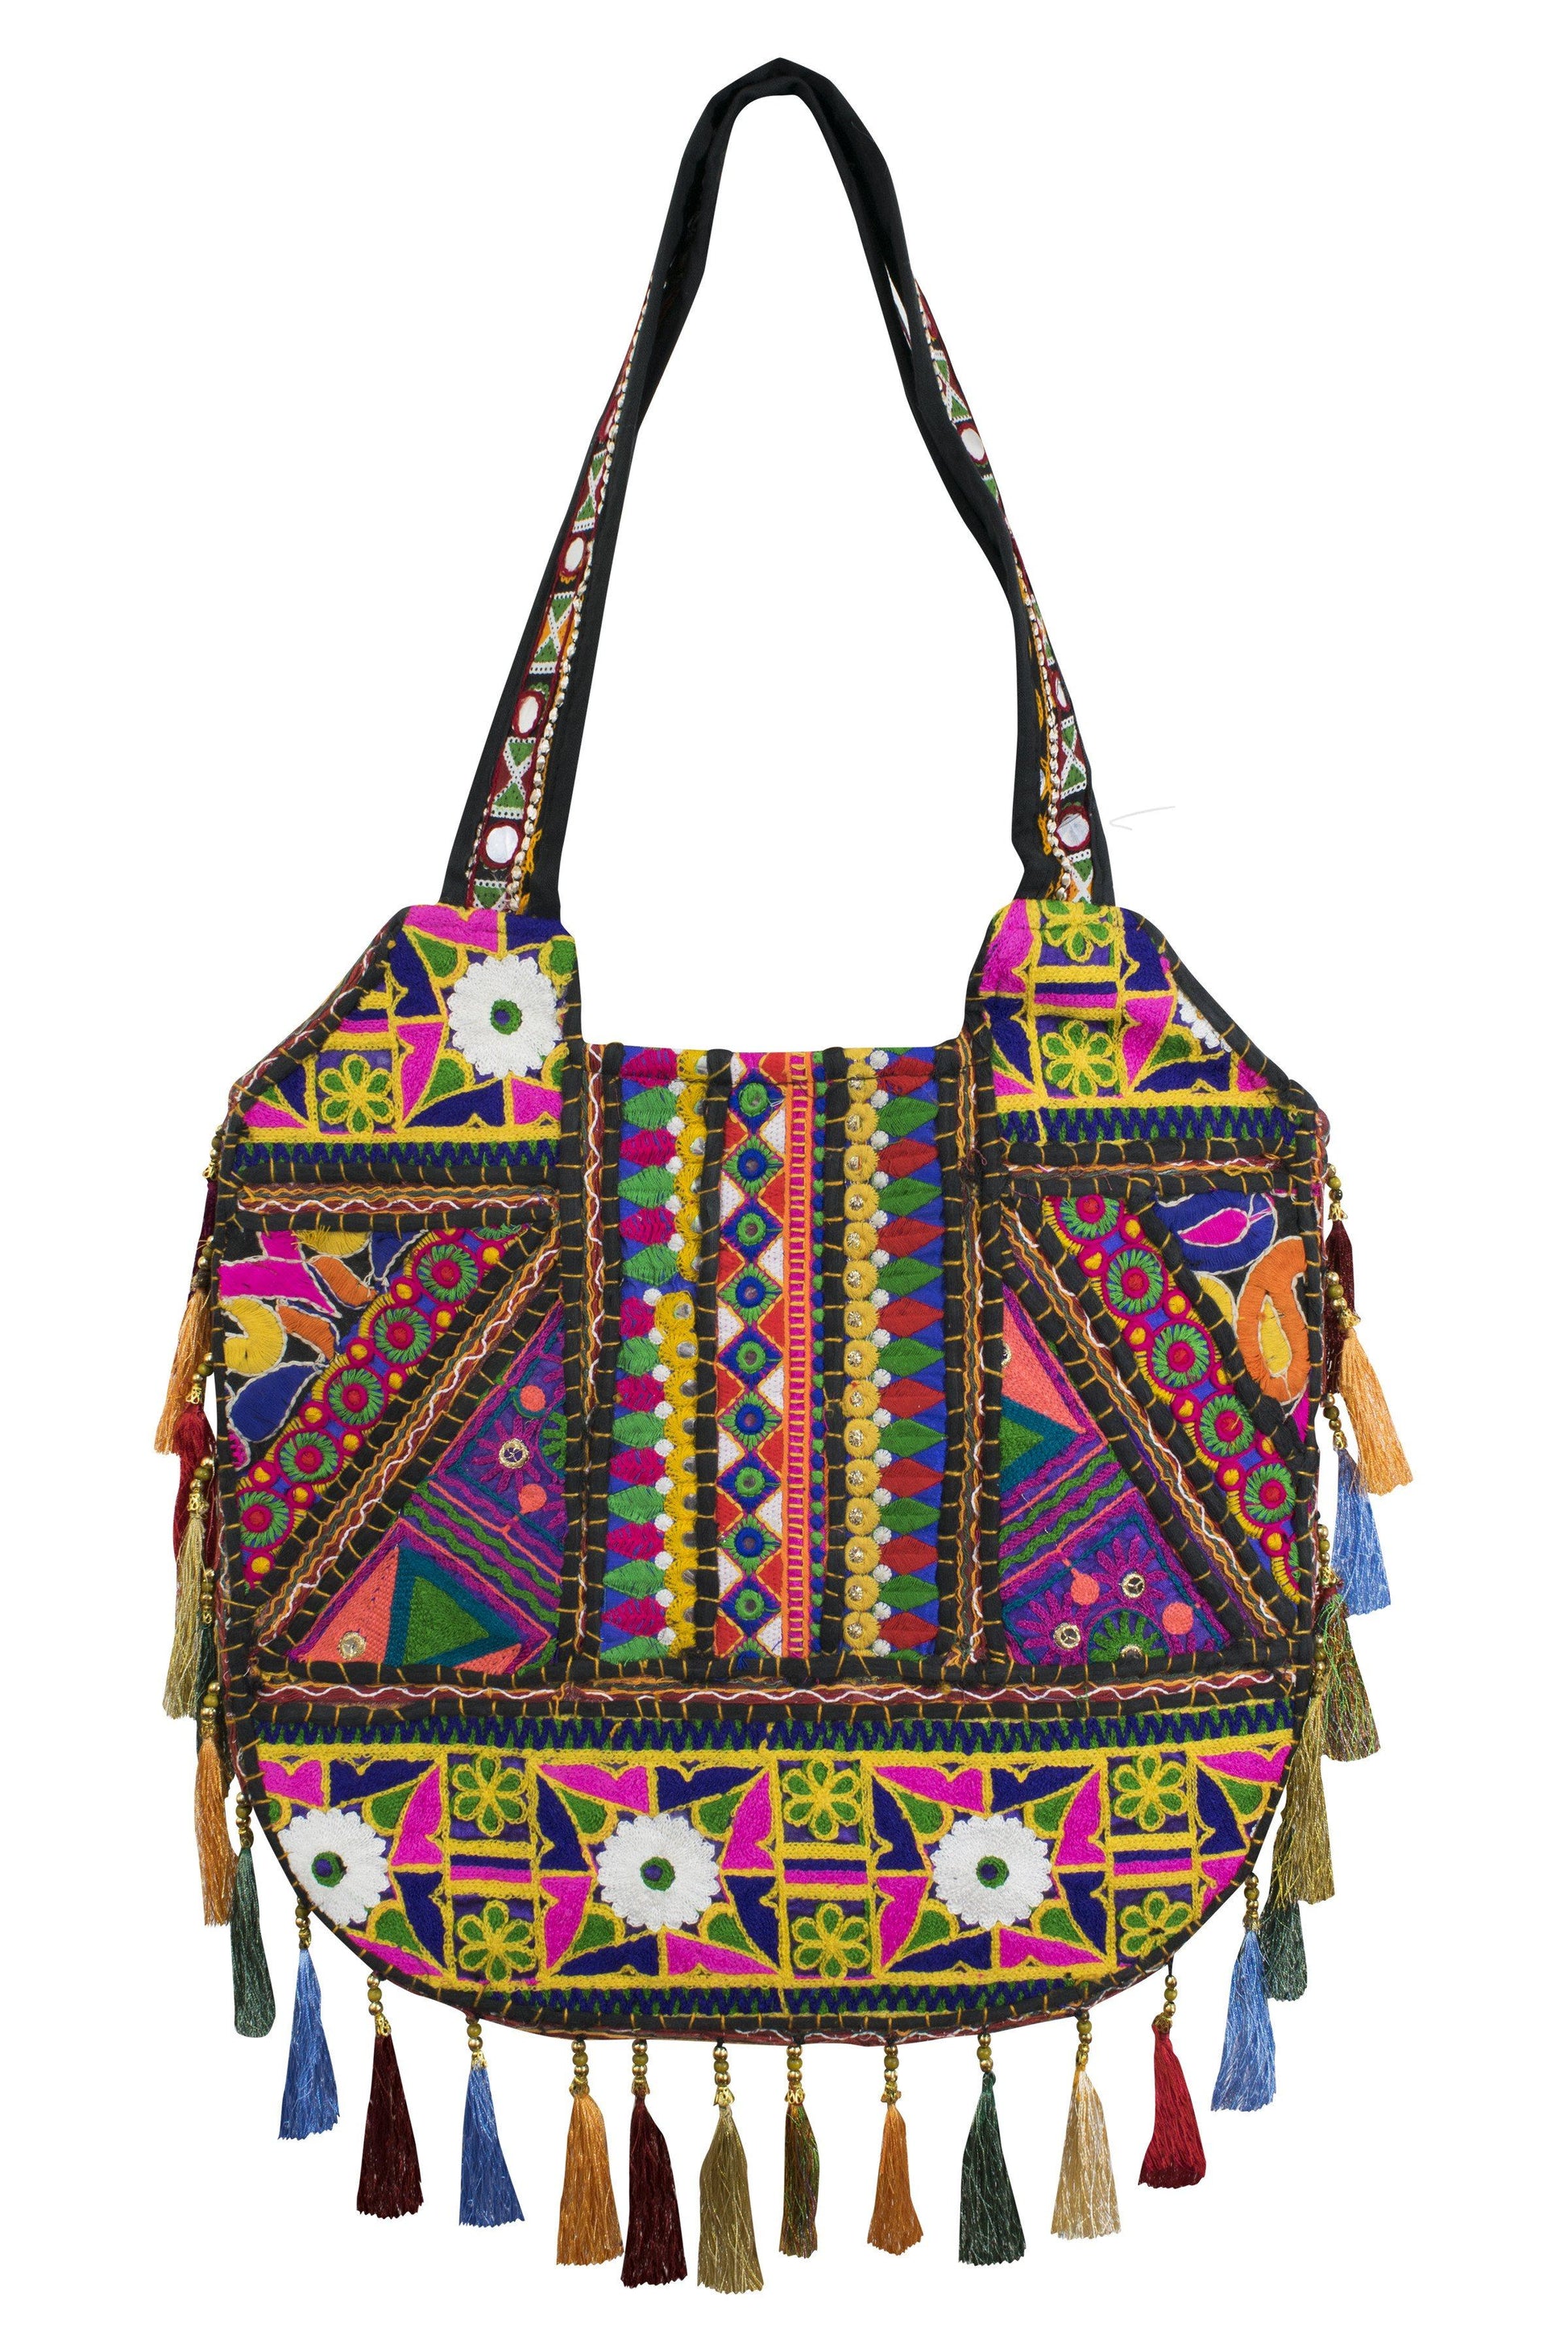 Ethnic Indian style Embroidered Bag Shoulder Strap - CCCollections